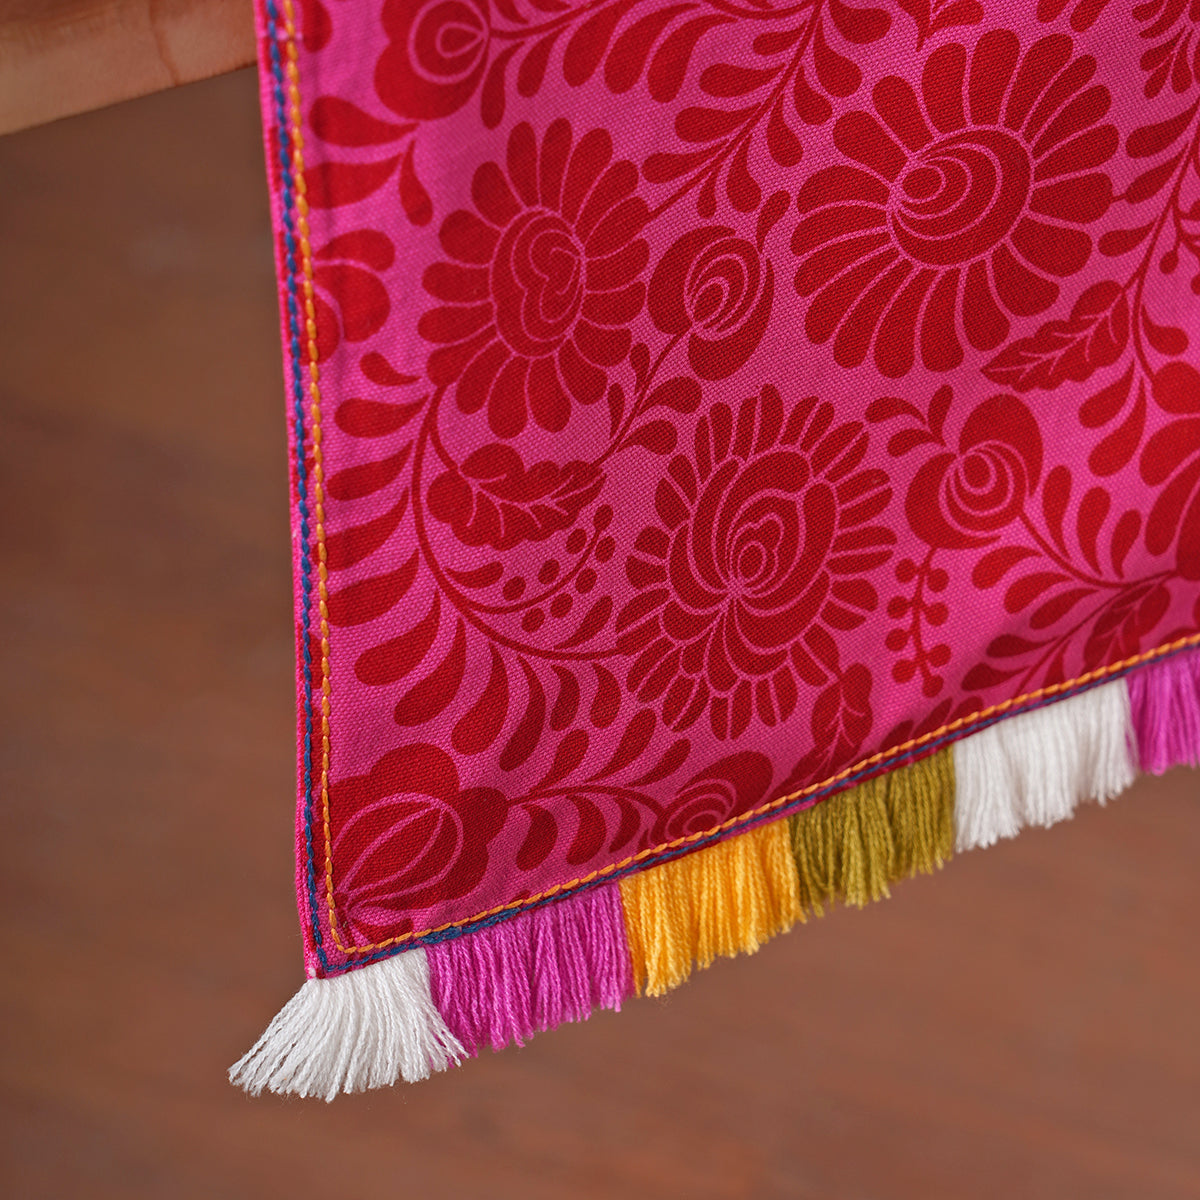 Matyo - Hot Pink printed cotton Table runner with multicolour acrylic fringe, sizes available